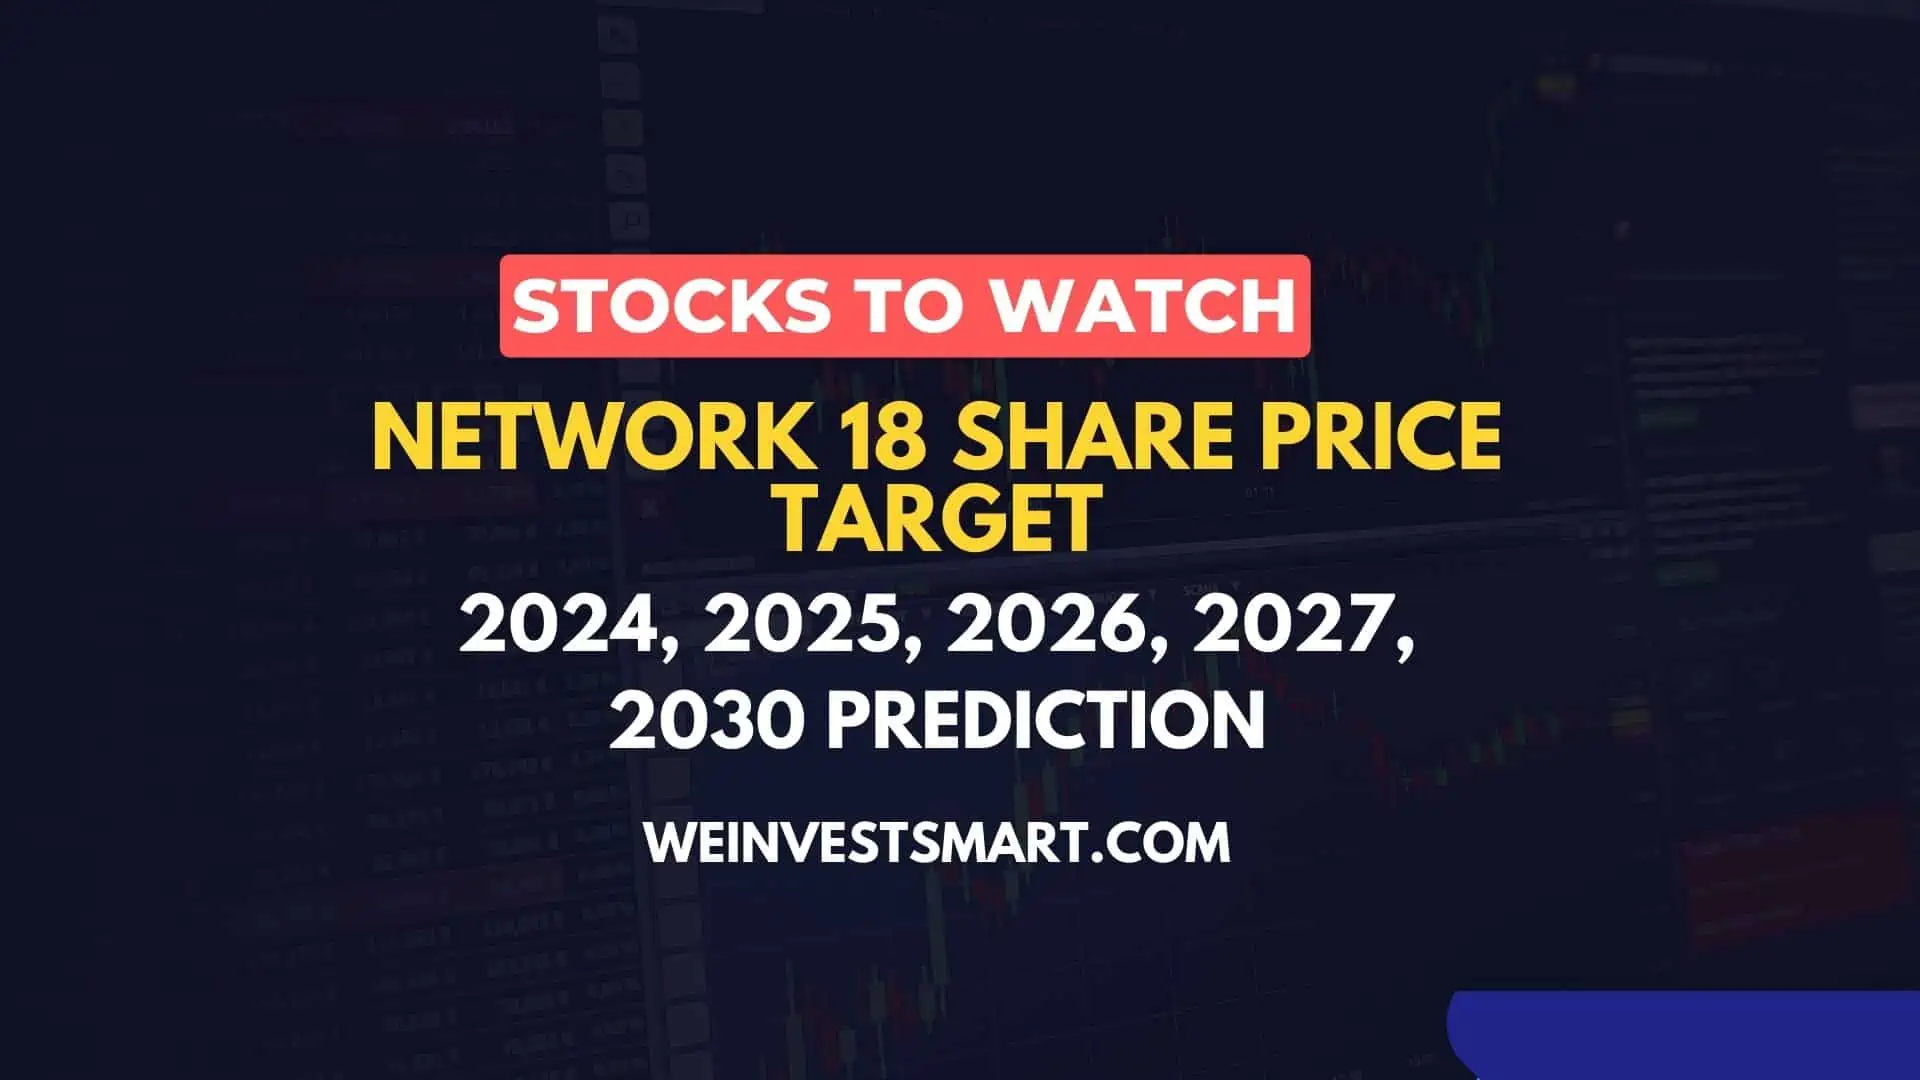 Network 18 share price target 2024, 2025, 2026, 2027, 2030 prediction buy or sell